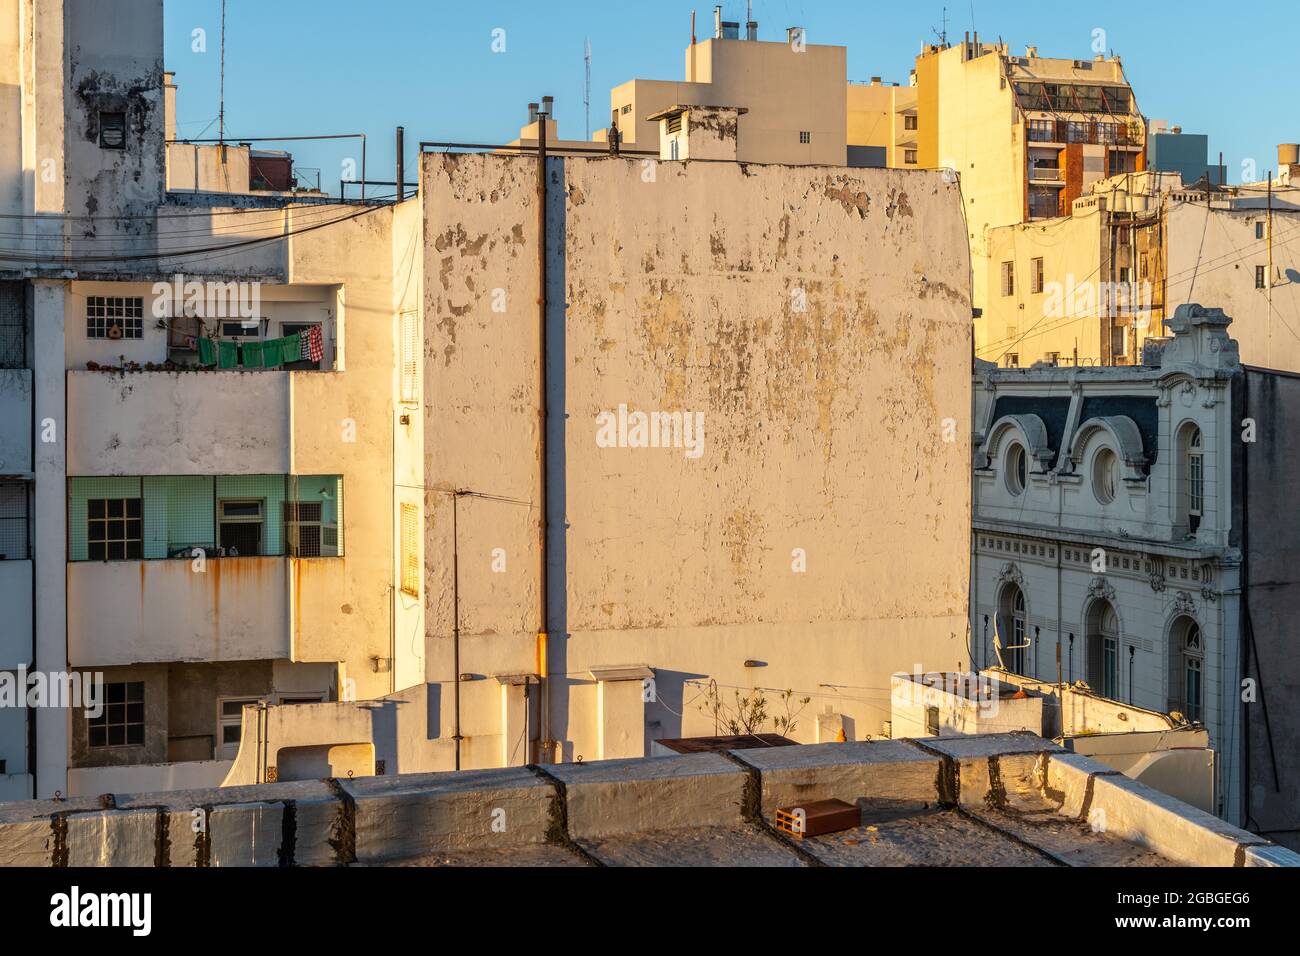 Buildings in the Monserrat area of Buenos Aires, Argentina in late afternoon sunlight Stock Photo